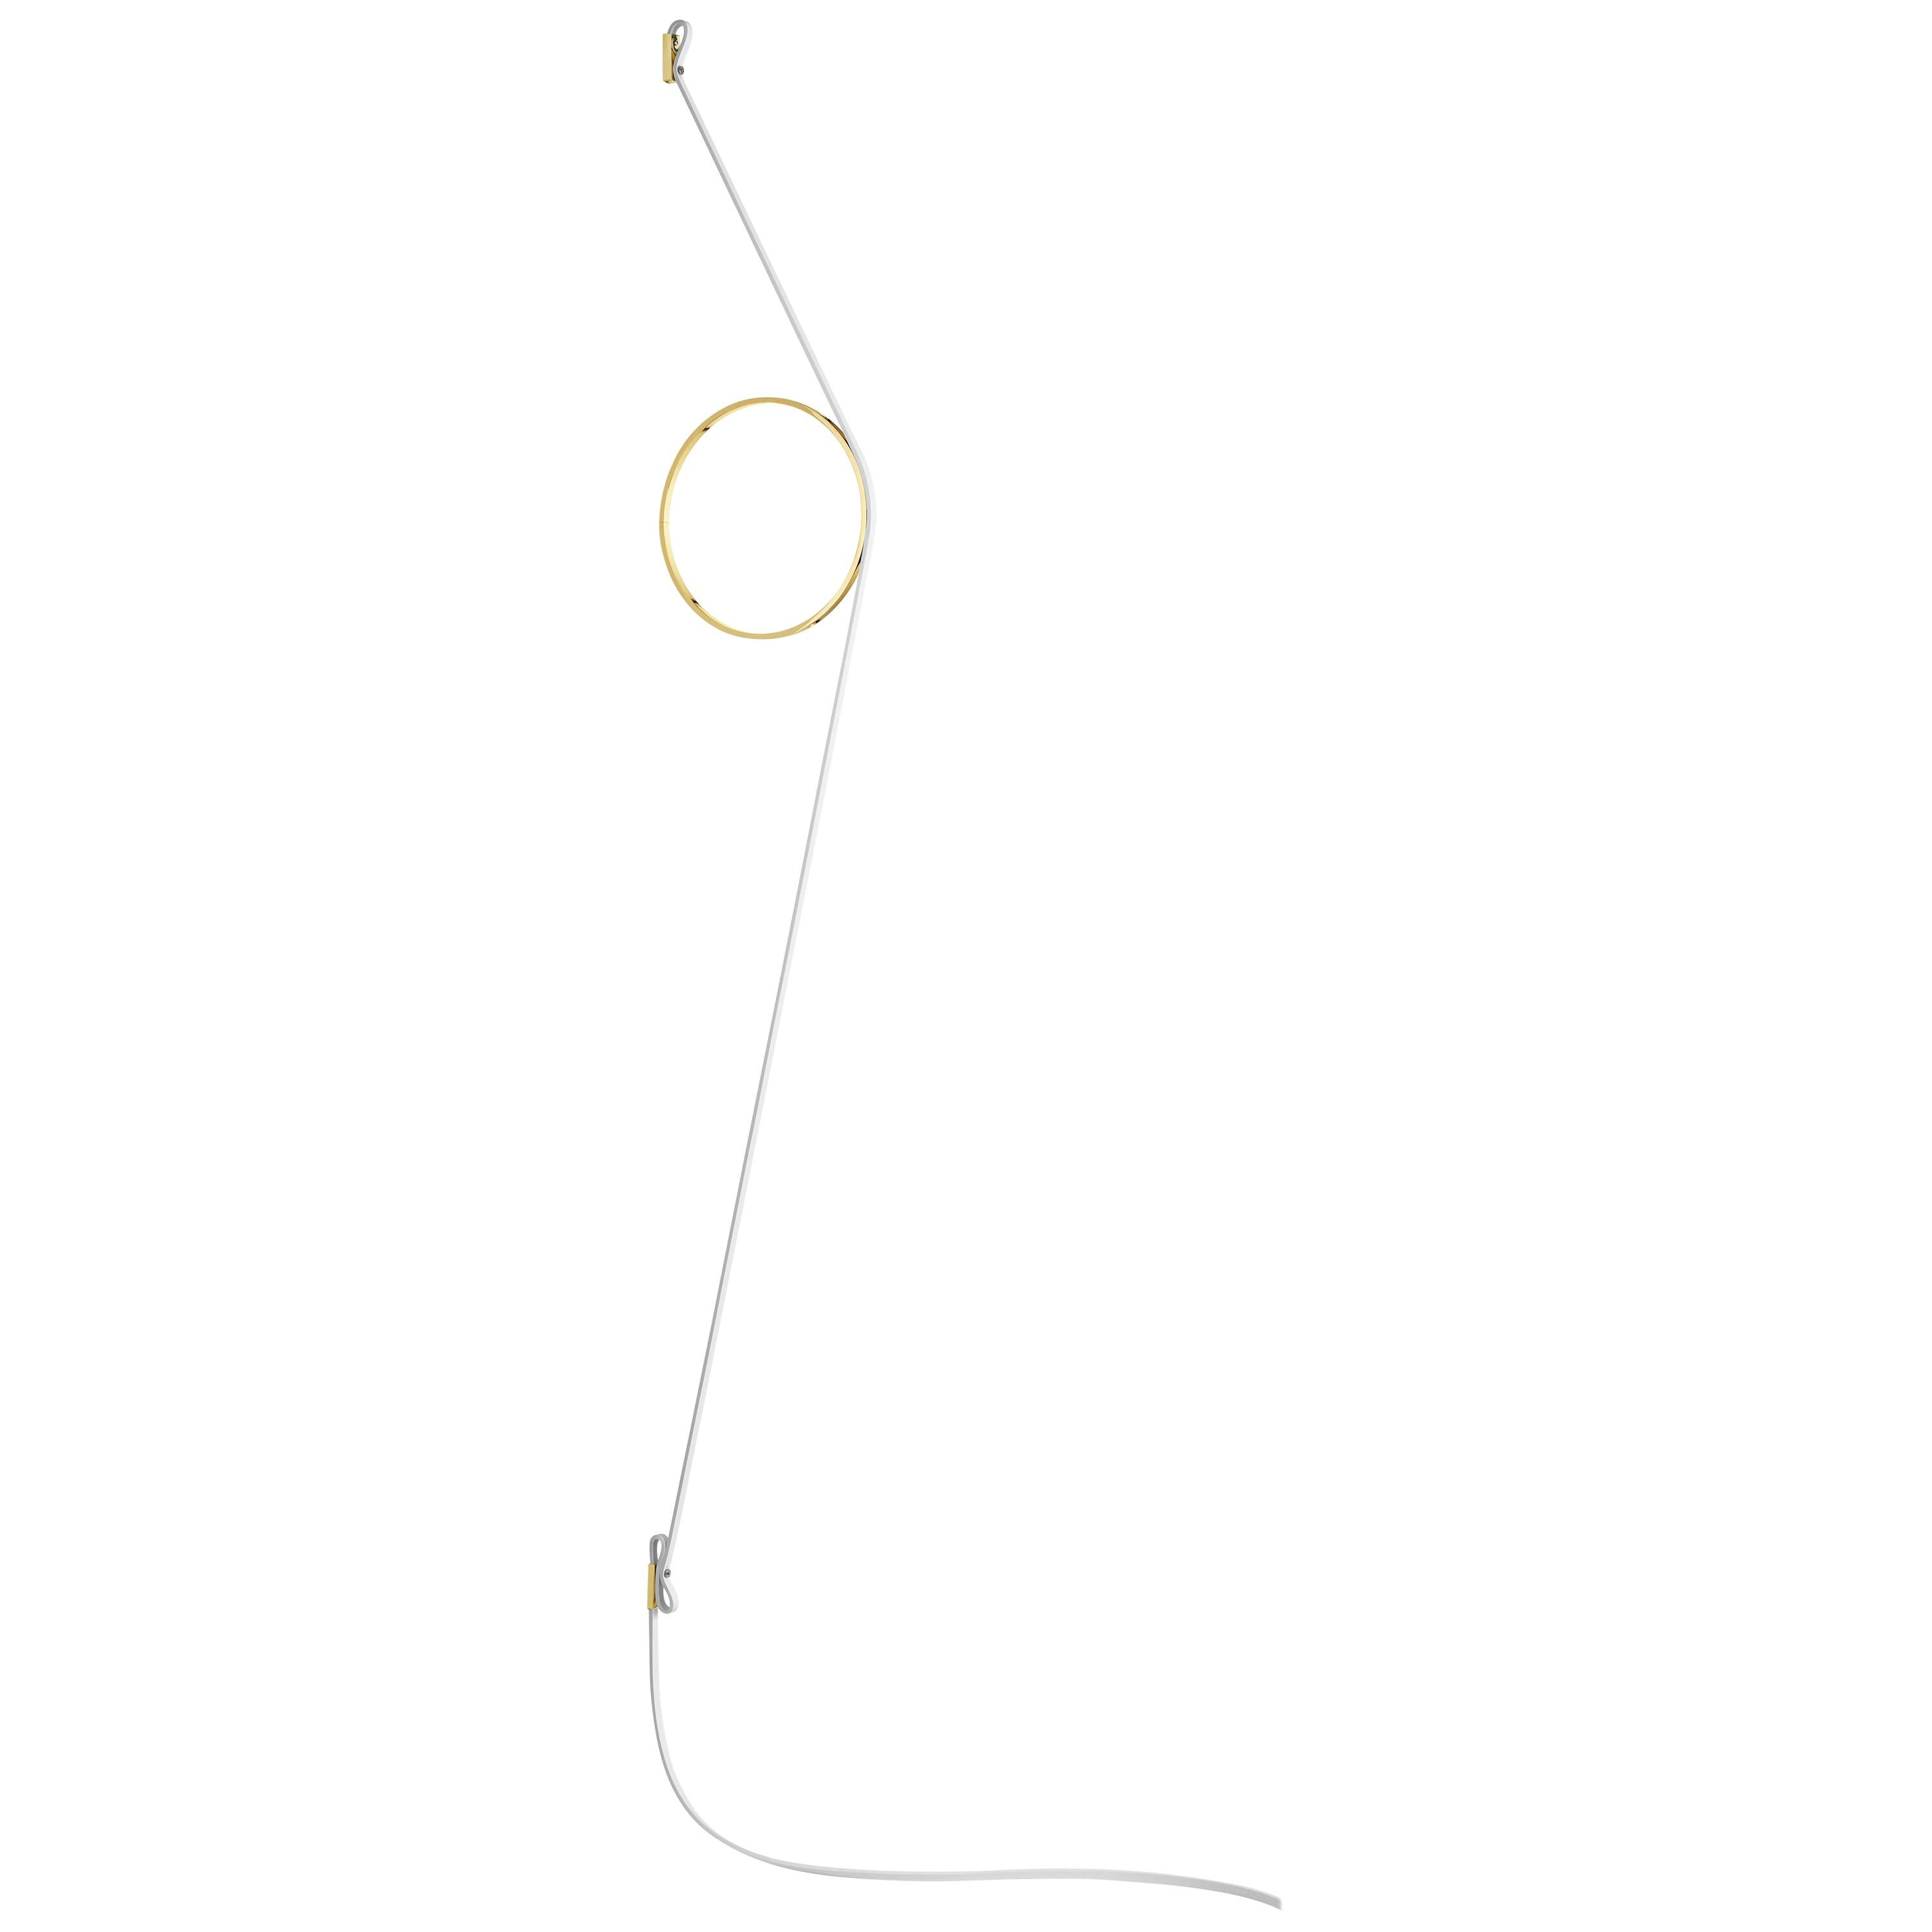 FLOS Wirering Wall Light in White and Gold by Formafantasma